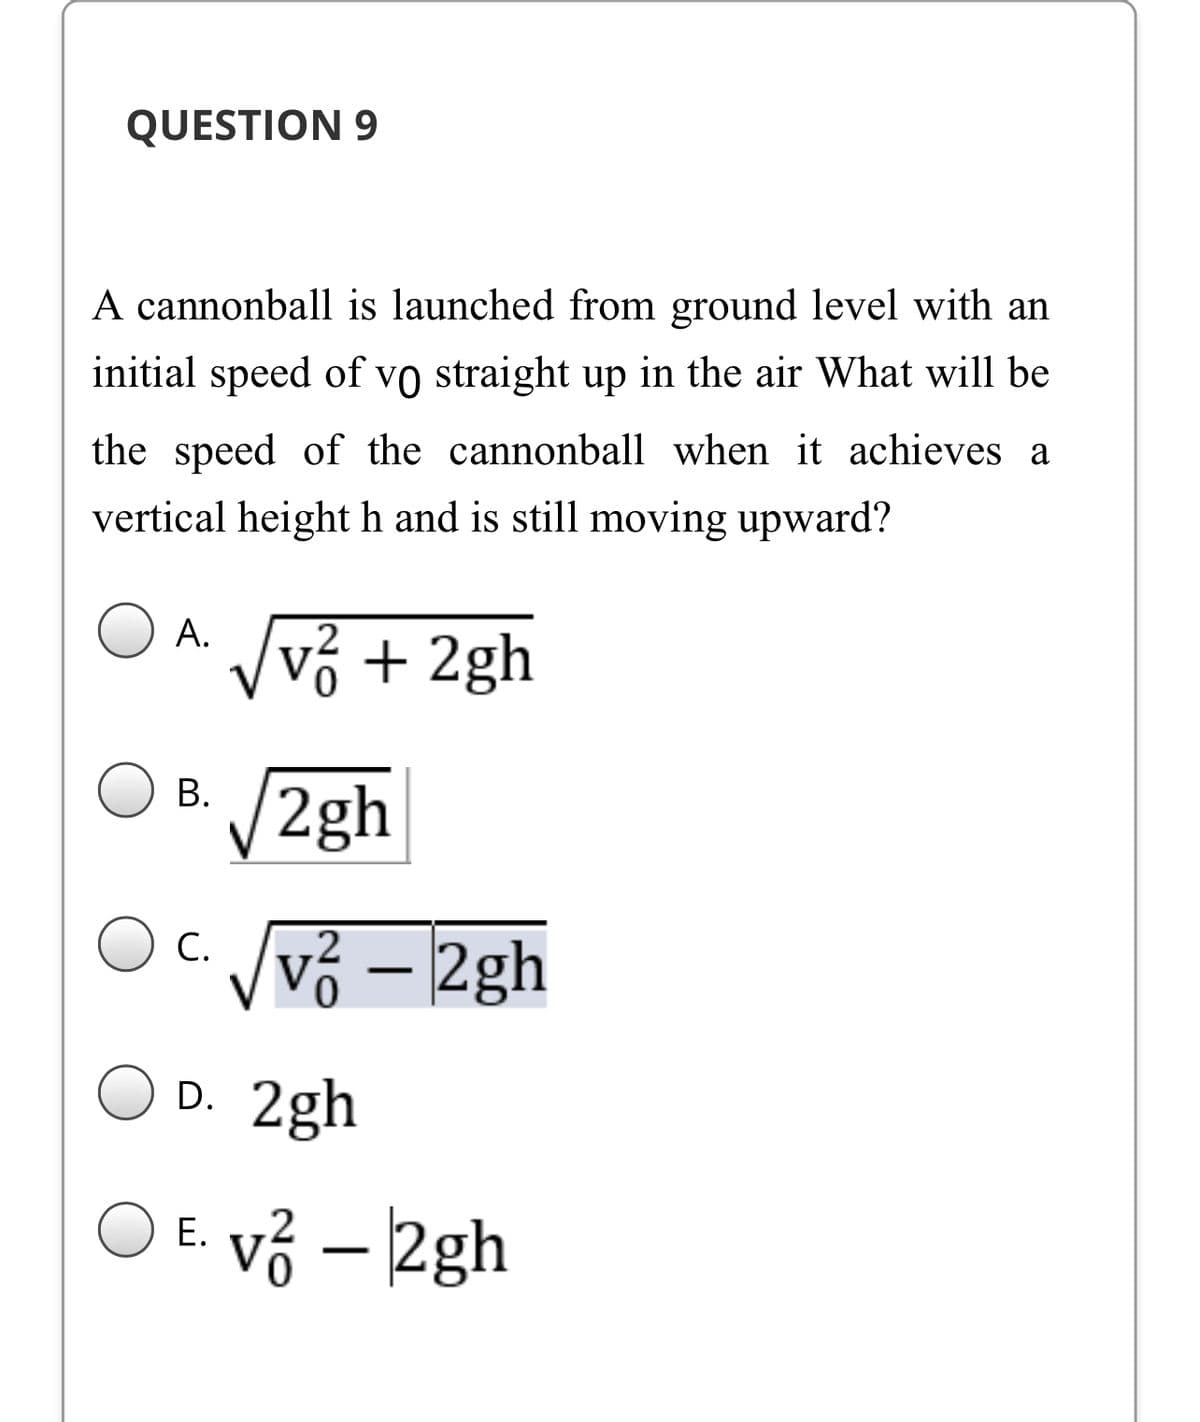 QUESTION 9
A cannonball is launched from ground level with an
initial speed of vo straight up in the air What will be
the speed of the cannonball when it achieves a
vertical height h and is still moving upward?
A.
Vvỏ + 2gh
V2gh
В.
vỏ – 2gh
C.
D. 2gh
E. vỏ – 2gh
|
